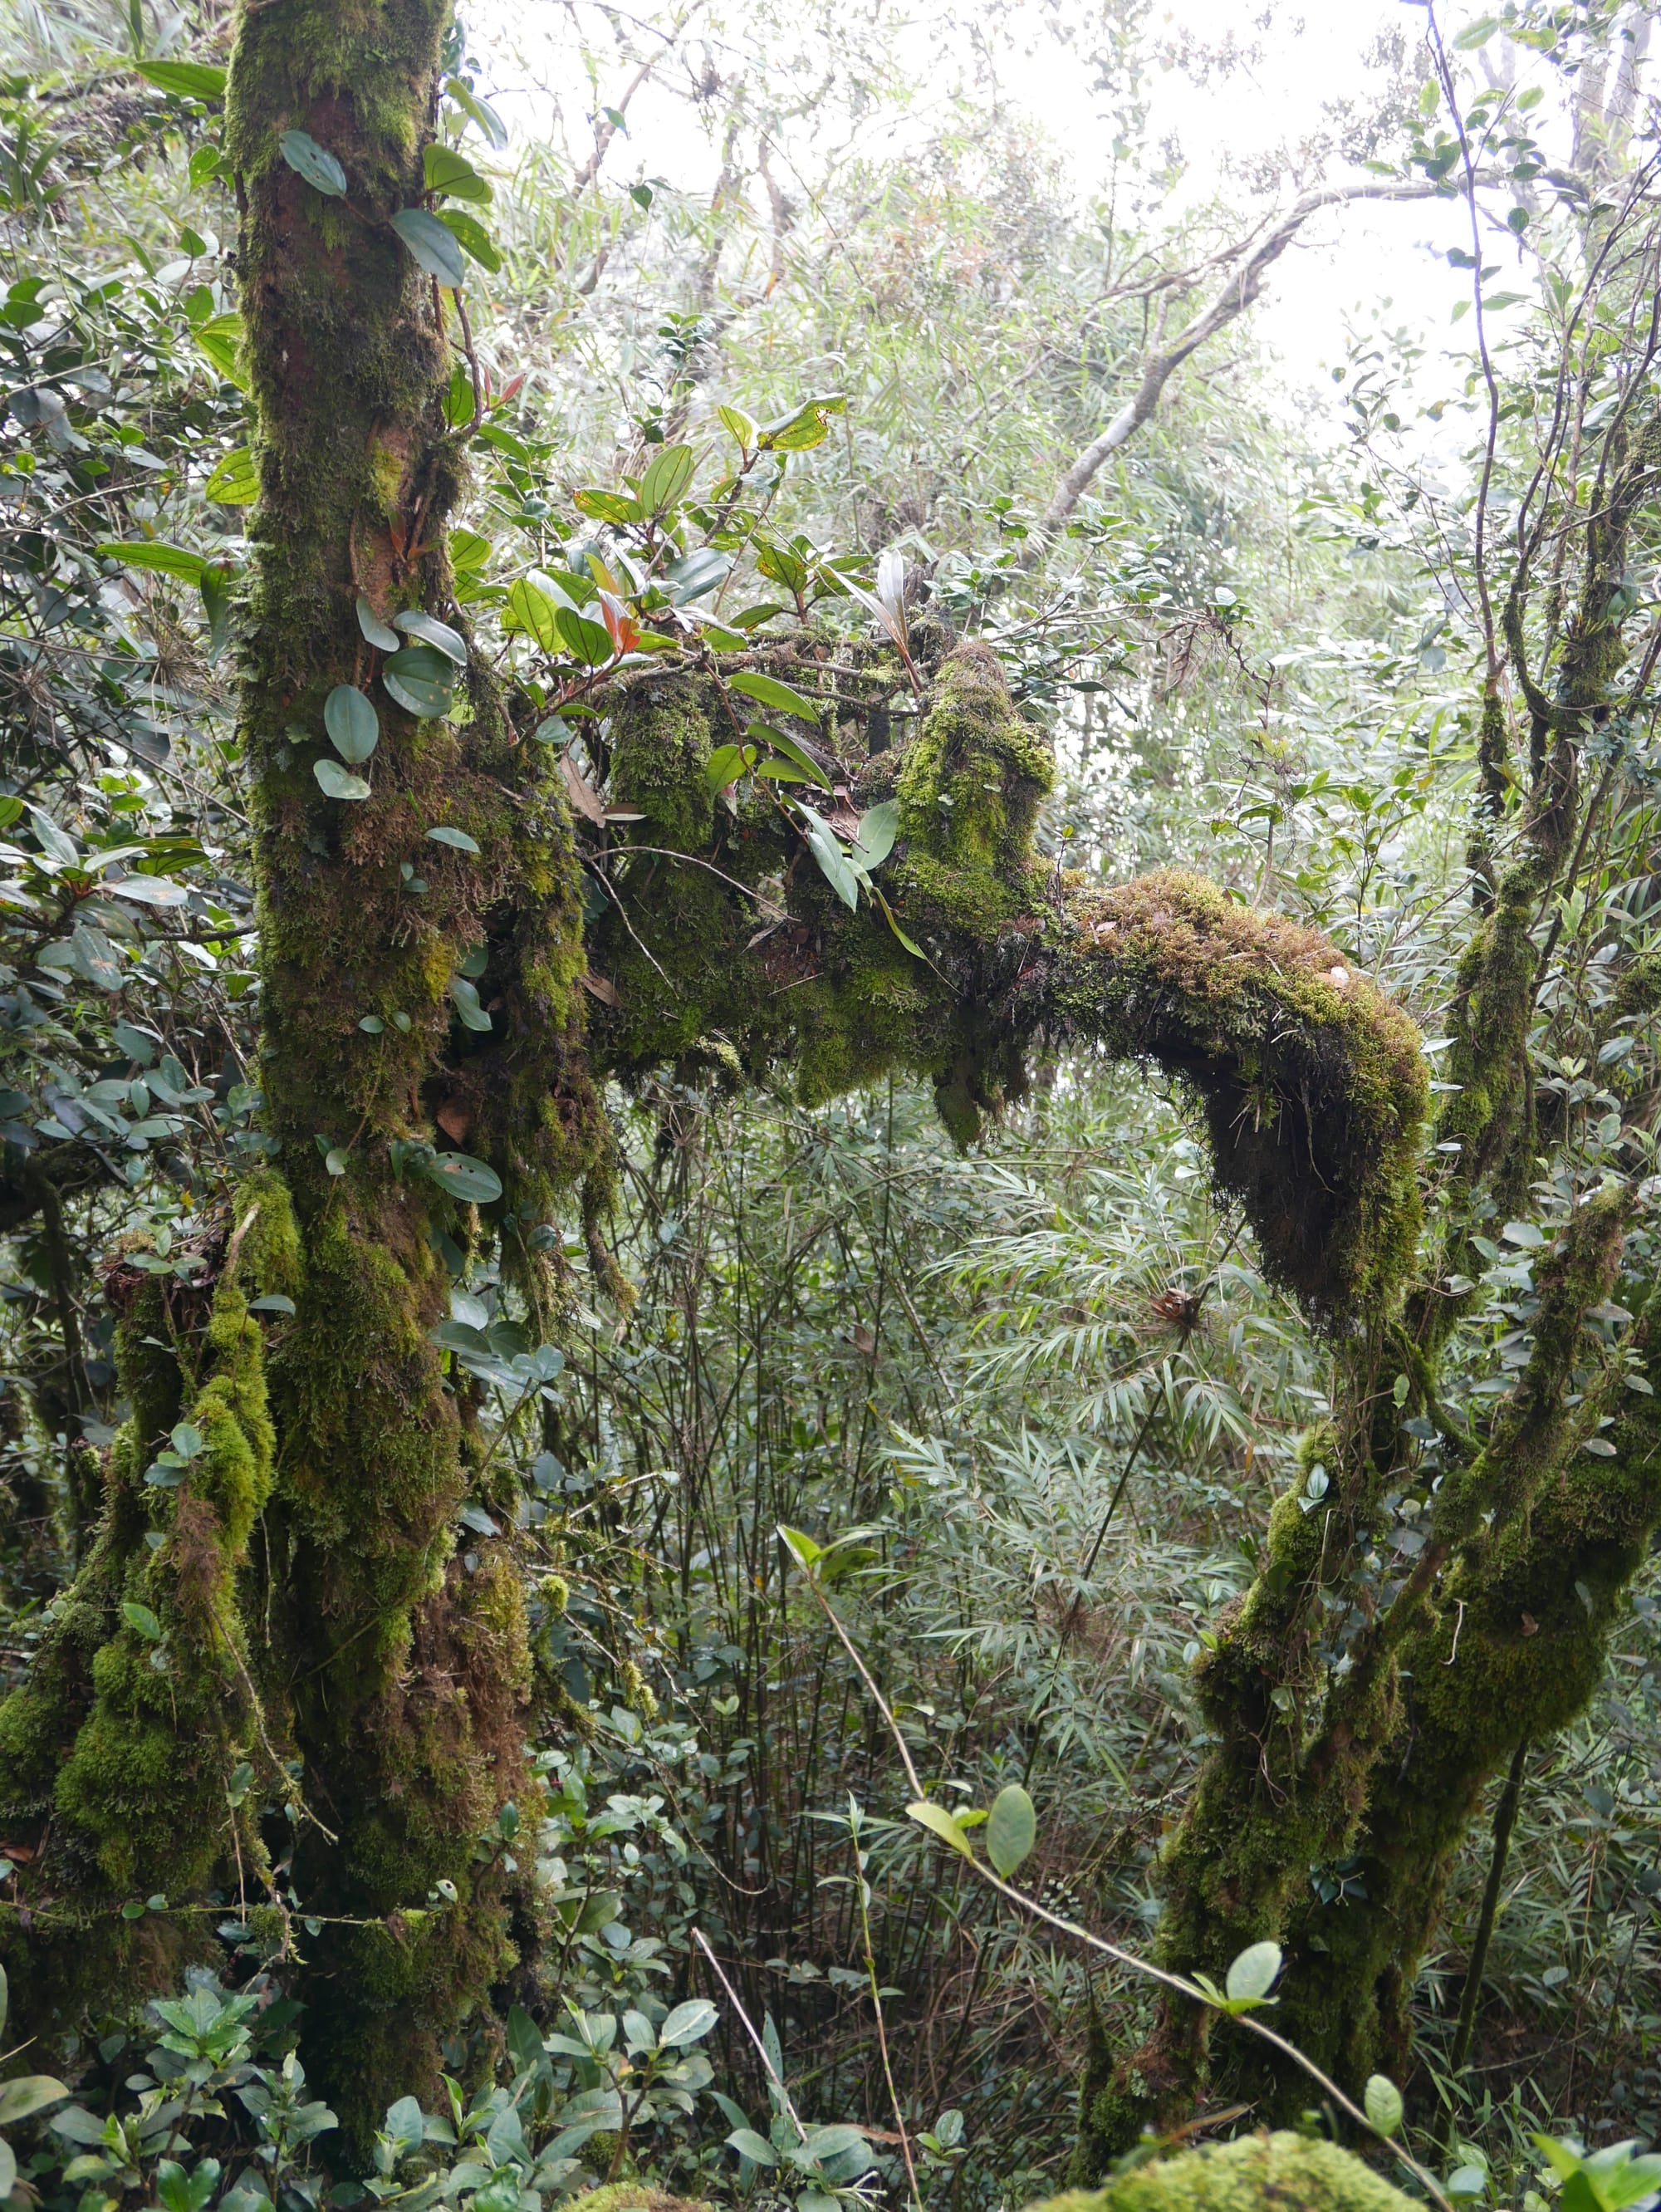 Photo by Author — Mossy Forest, Cameron Highlands, Malaysia